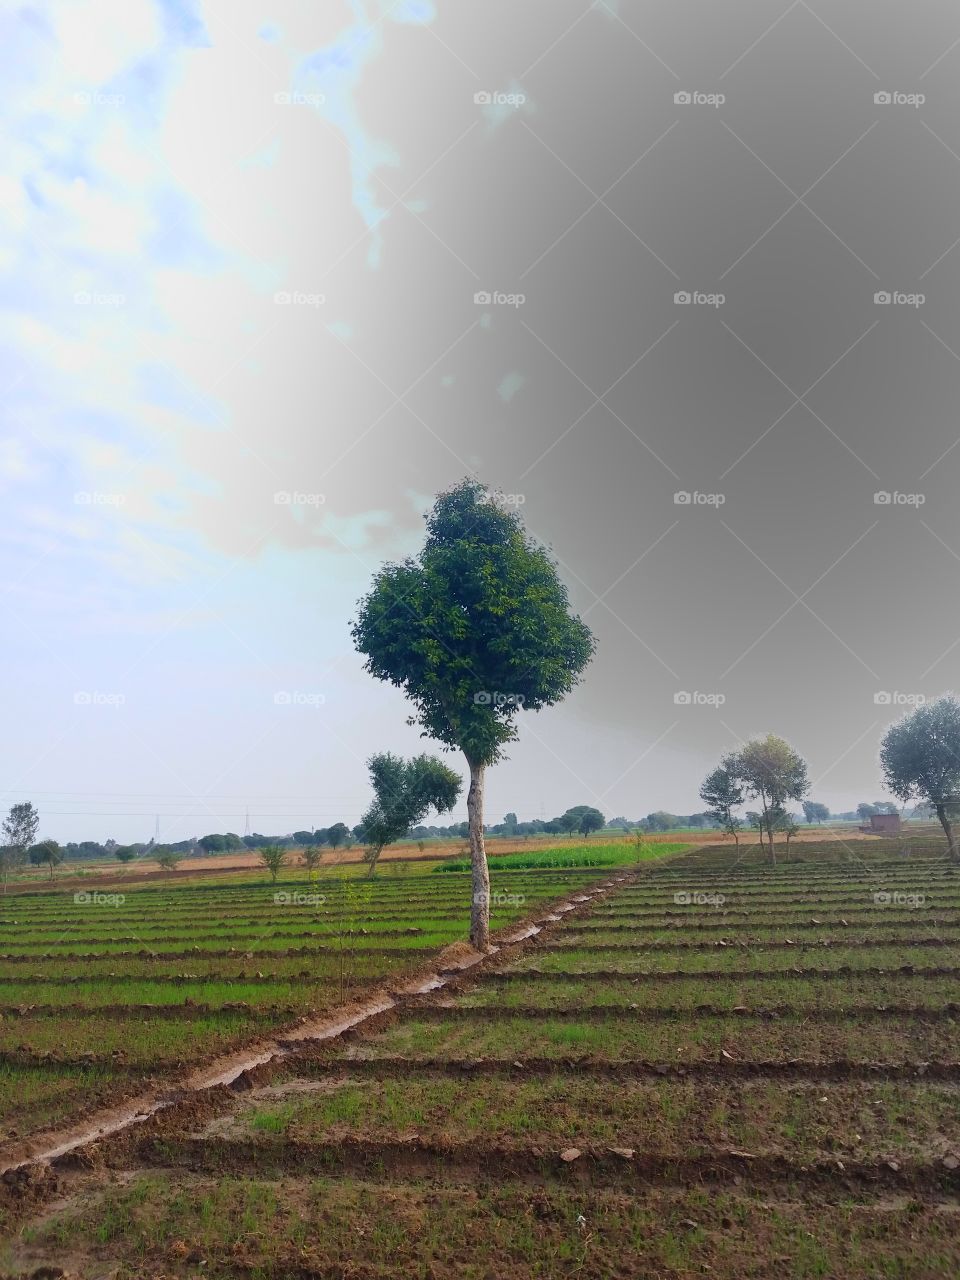 There is a alone tree.
And under tree there is a wheat are growing...
And the upper Side The Black Clouds are passing ....
And the sunlight or daylight is Going down .....
And a beautiful SCENE captured by Sufyan Saab......